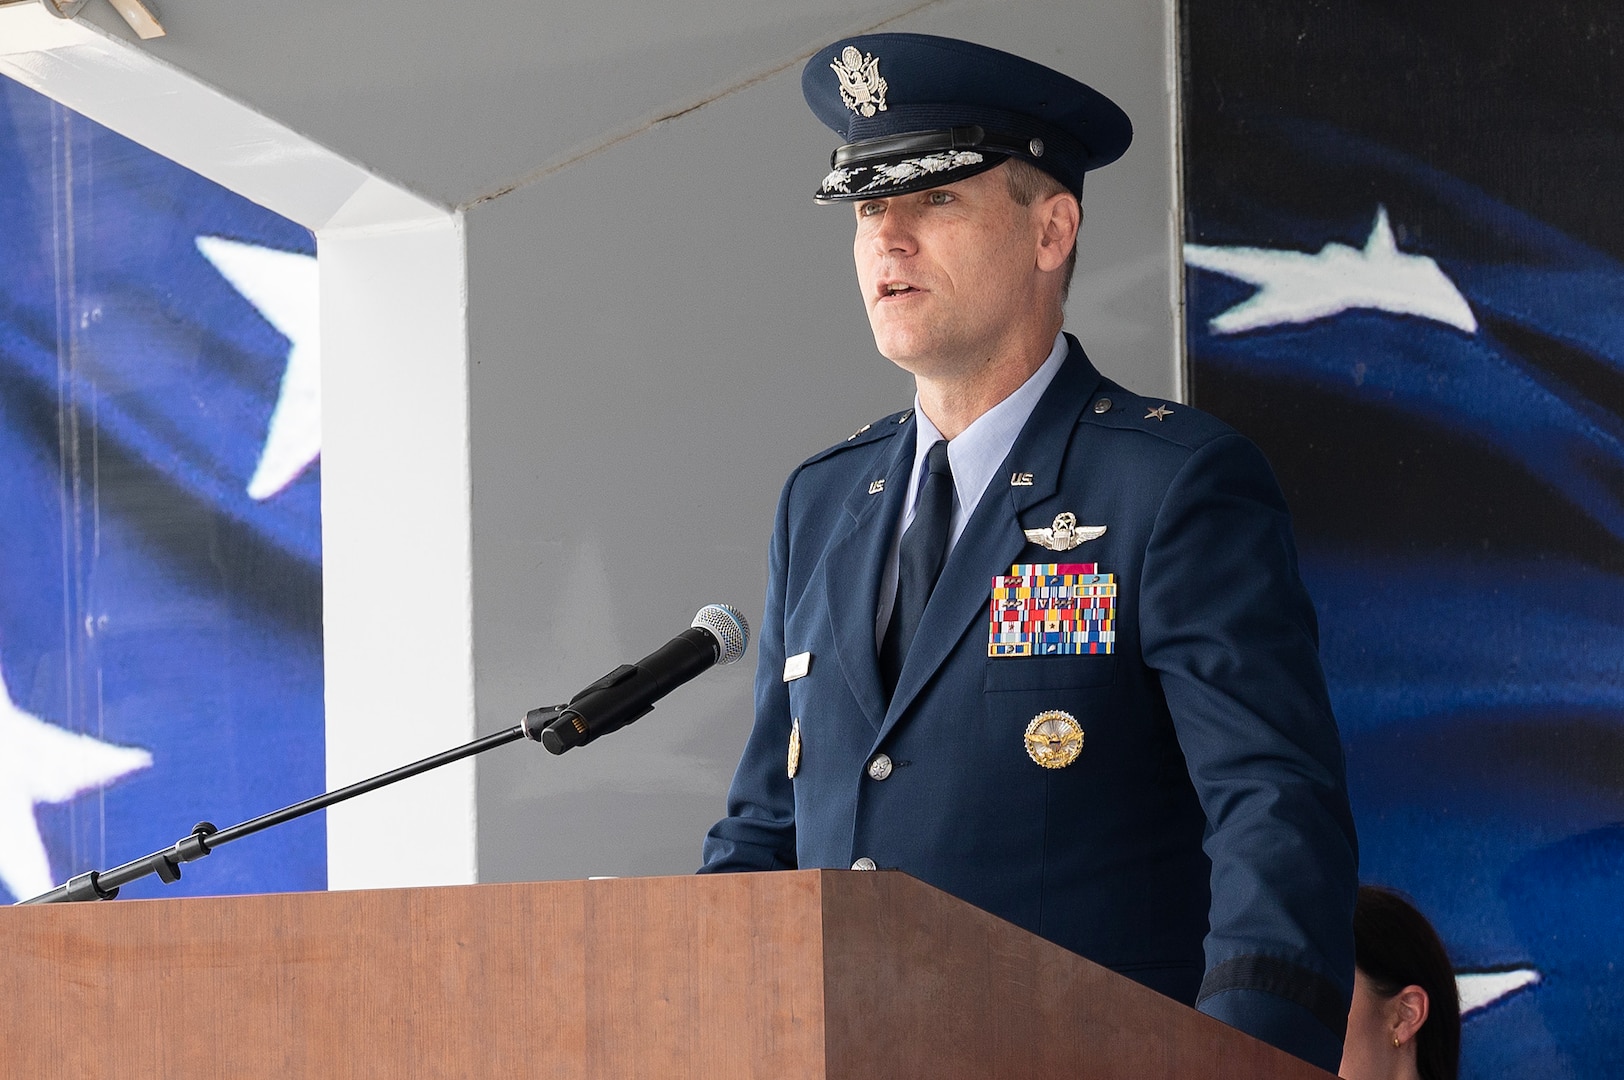 U.S. Air Force Brig. Gen. Jefferson J. O’Donnell, Air Force Personnel Center commander, speaks after receiving the AFPC flag during the change of command ceremony June 20 at Joint Base San Antonio-Randolph, Texas. Prior to taking command of AFPC, O’Donnell served as the Director of Regional Affairs for the Deputy Under Secretary of the Air Force, International Affairs.